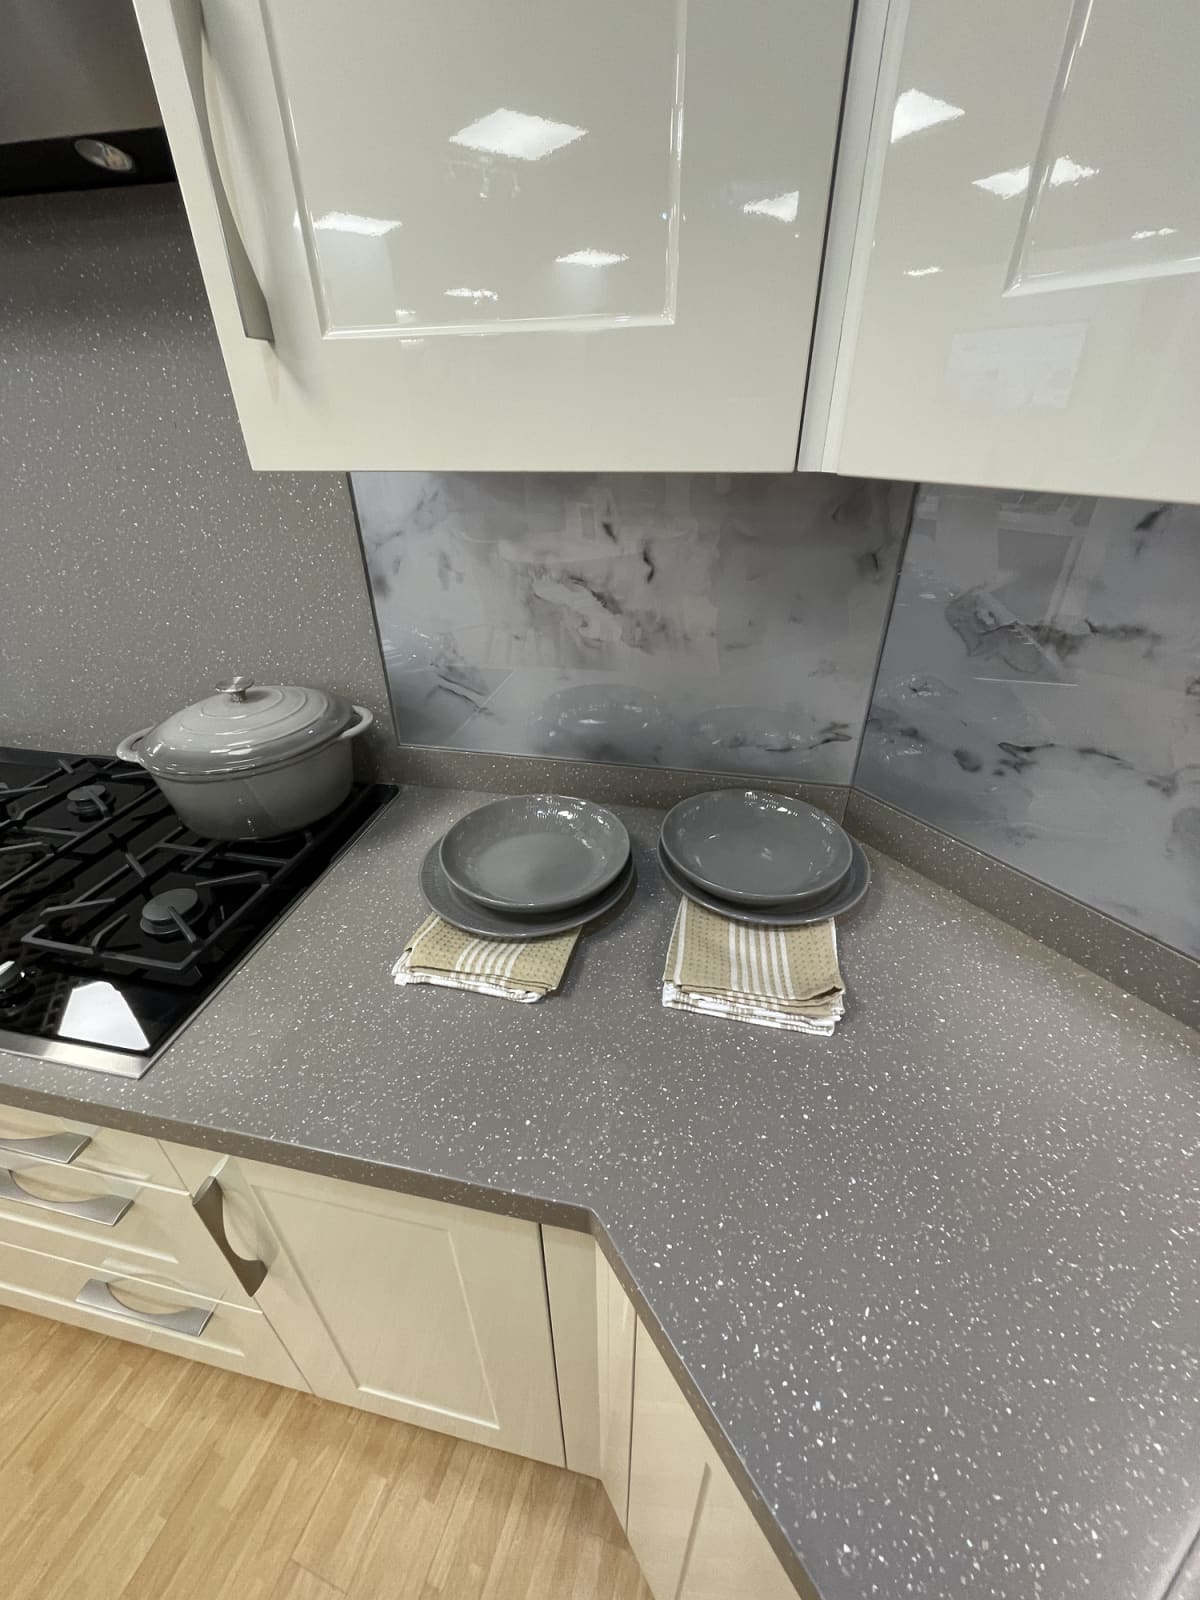 Stock photo showing a black, glass ceramic gas stove top in a grey kitchen counter over glossy, cream floor cabinets.